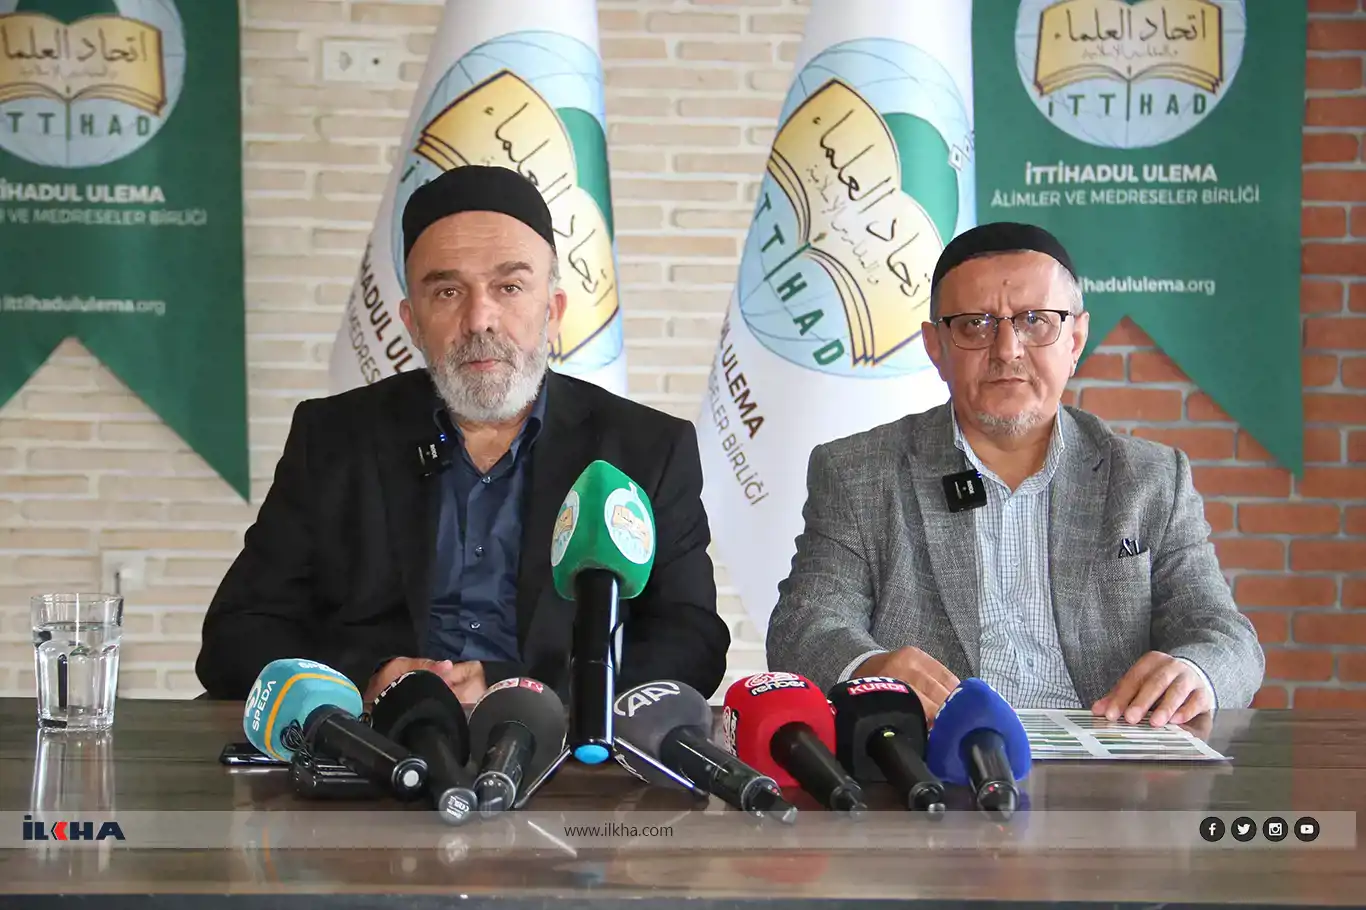 Islamic Scholars to address key issues at meeting in Diyarbakır